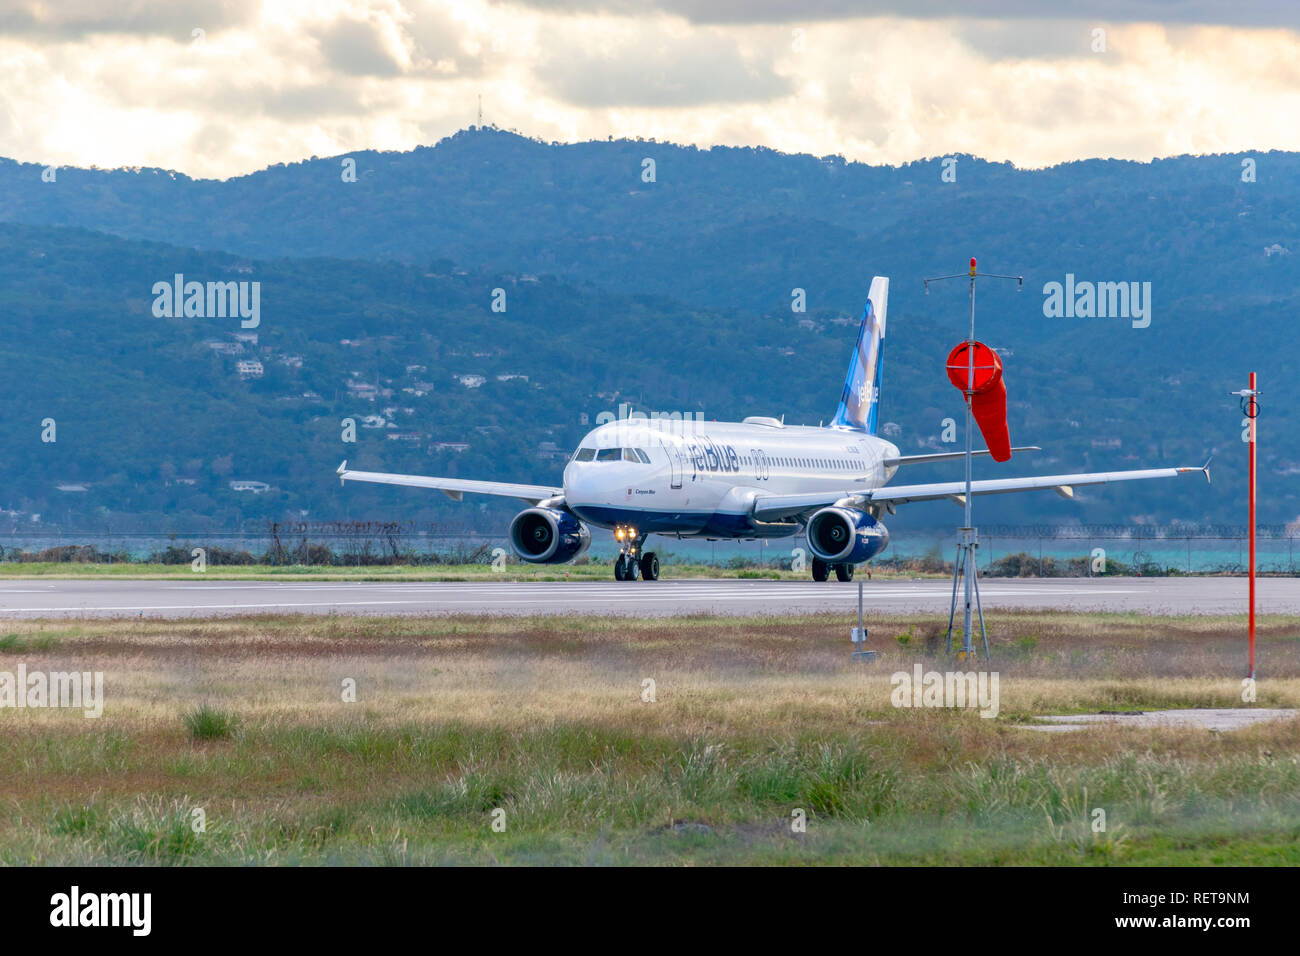 Montego Bay, Jamaica - January 21 2017: JetBlue aircraft arriving at the Sangster International Airport (MBJ) in Montego Bay, Jamaica. Stock Photo